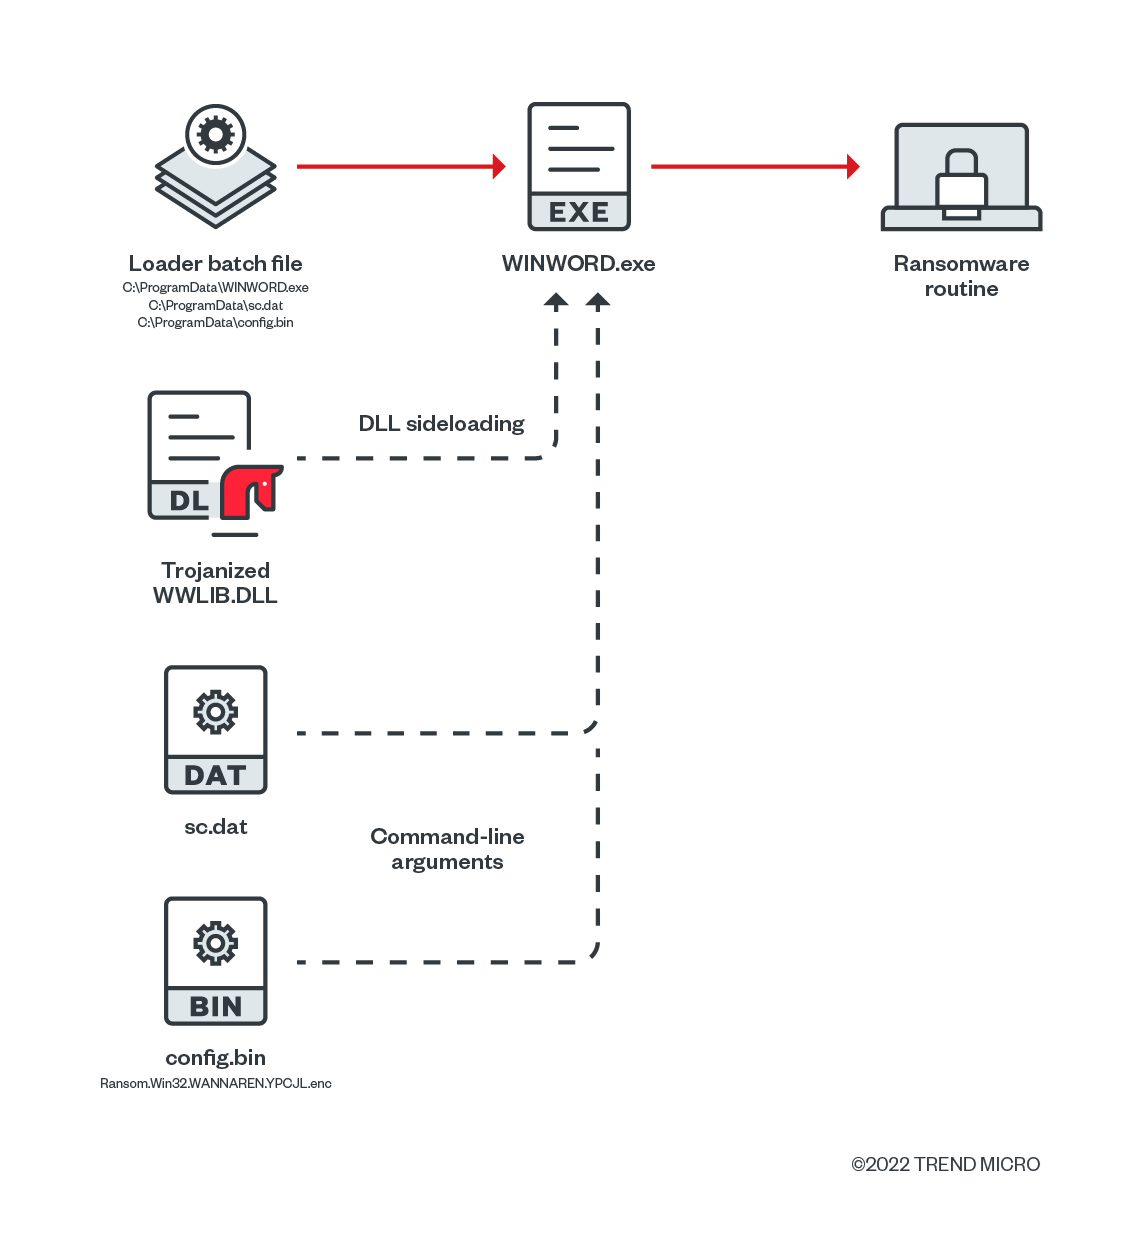 Figure 1. Execution flow of the ransomware